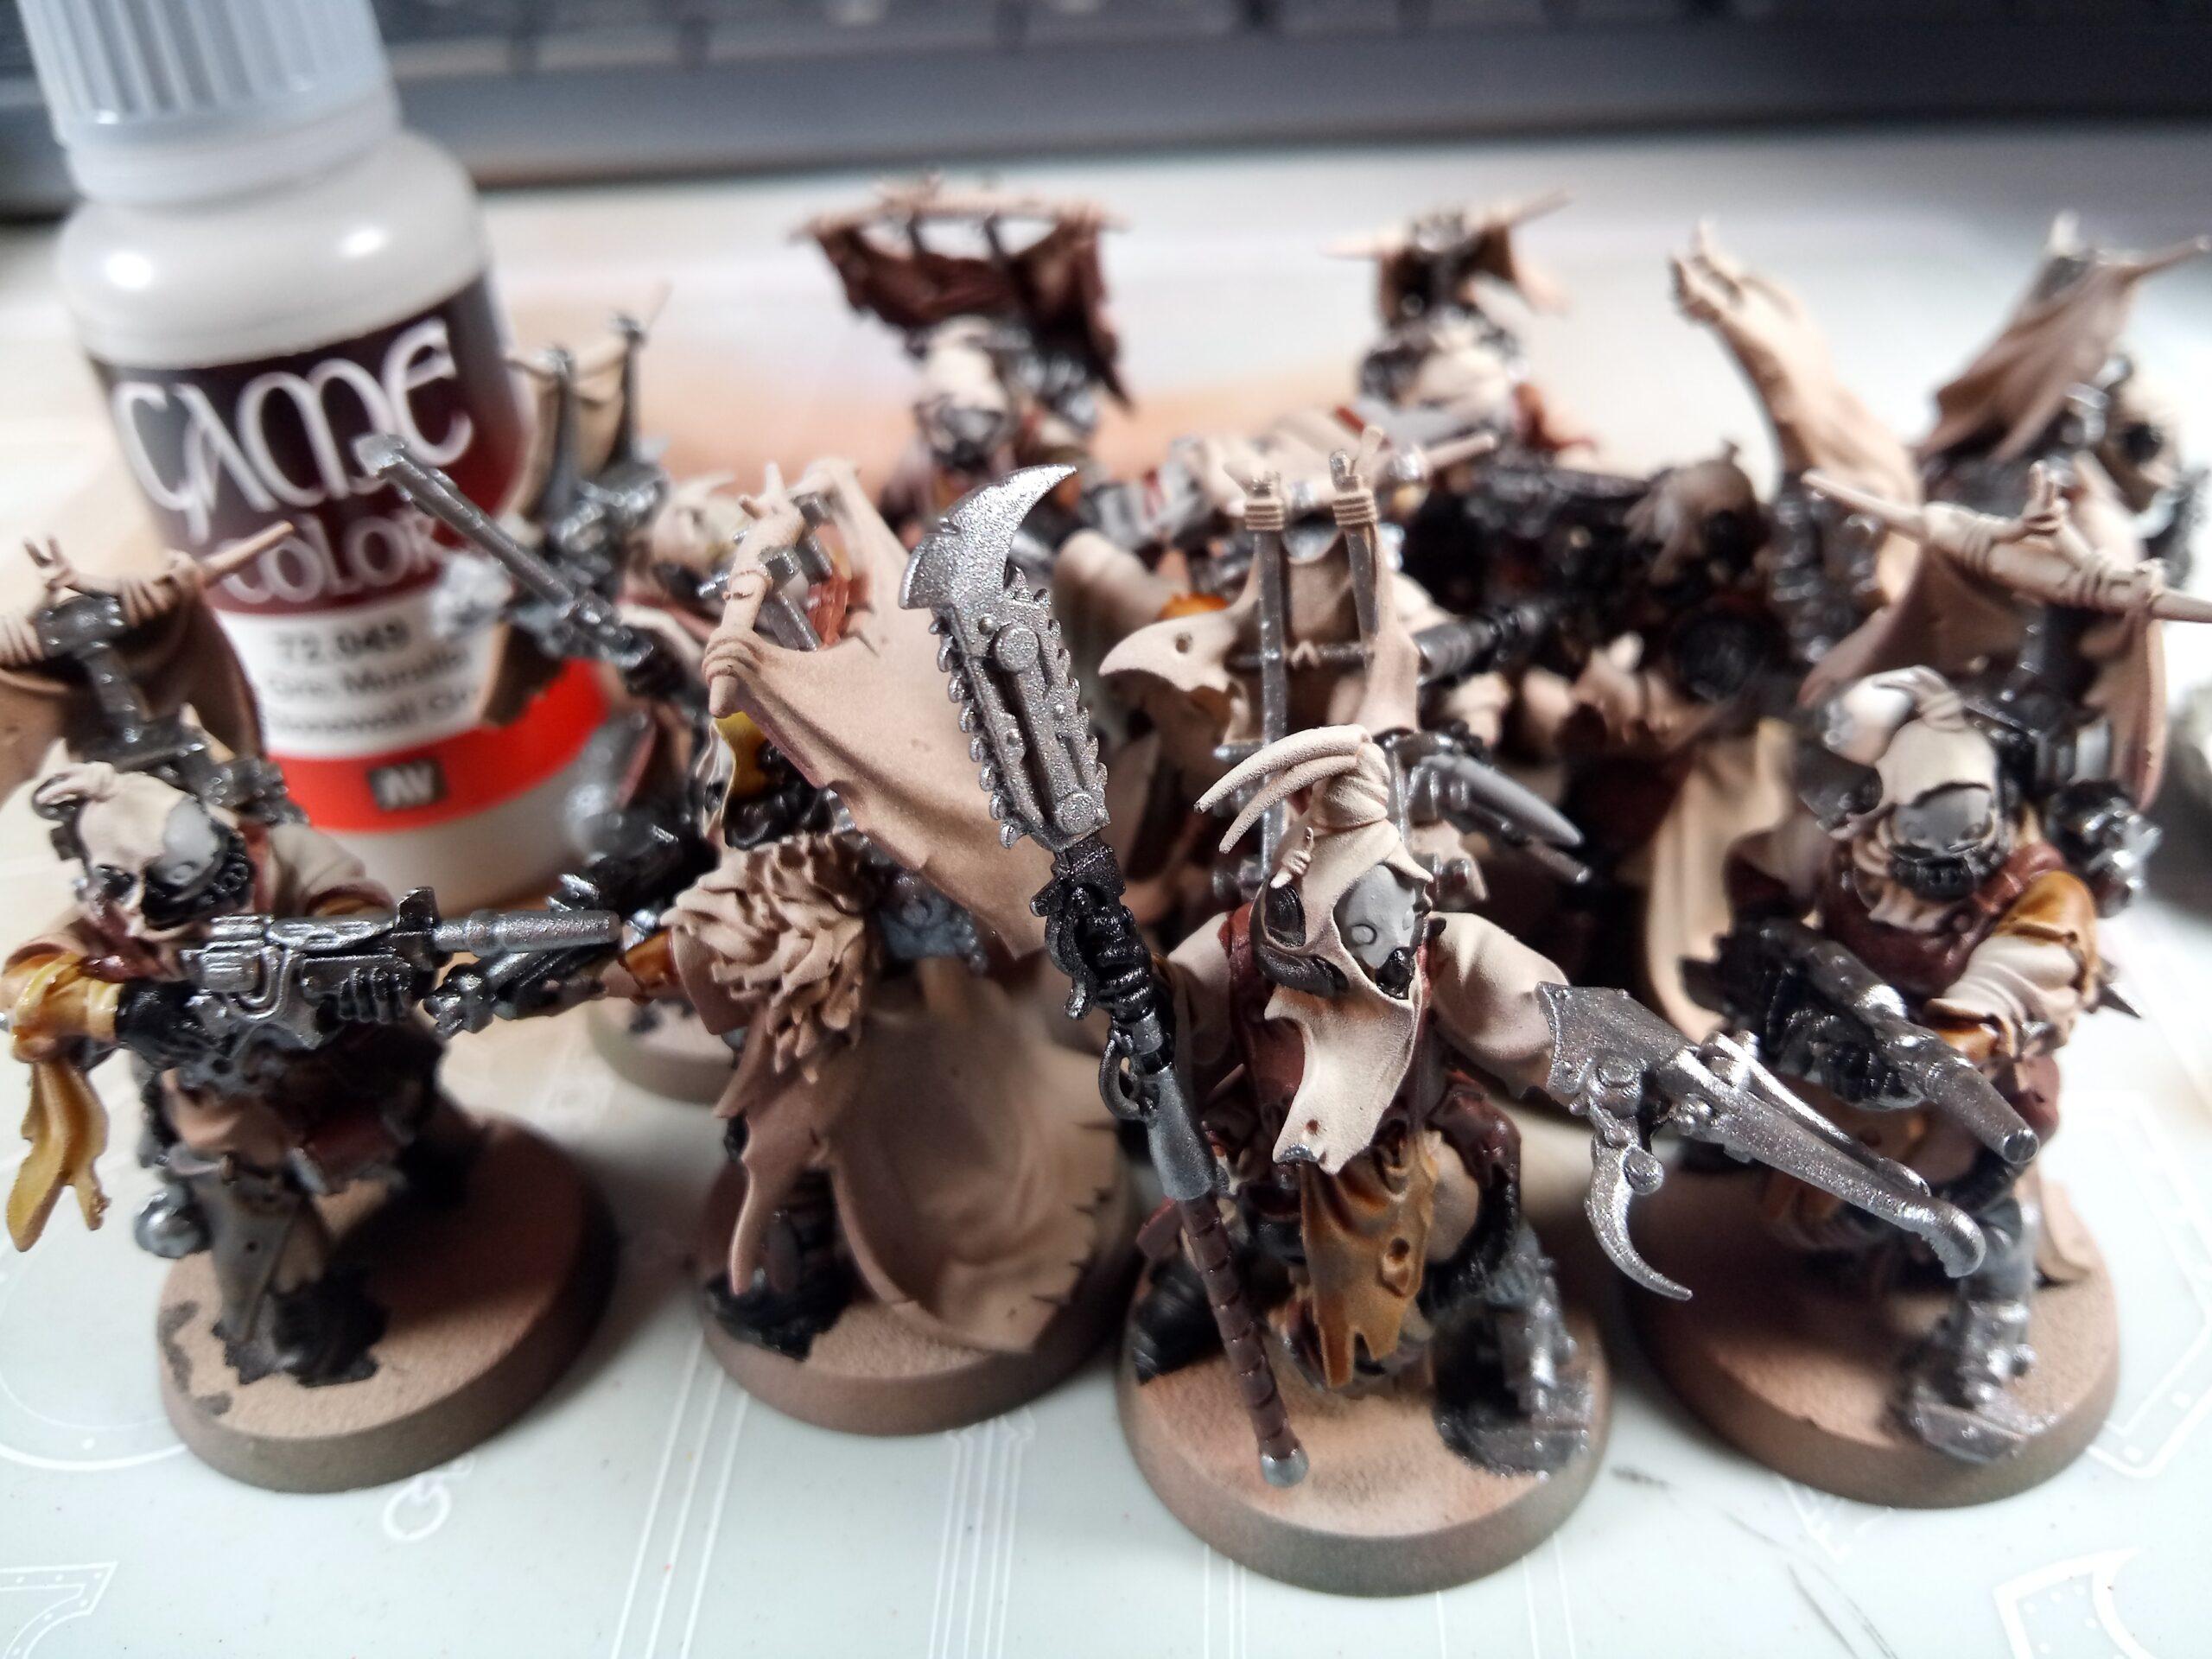 That's my Ashwaste Nomads with paint on them.